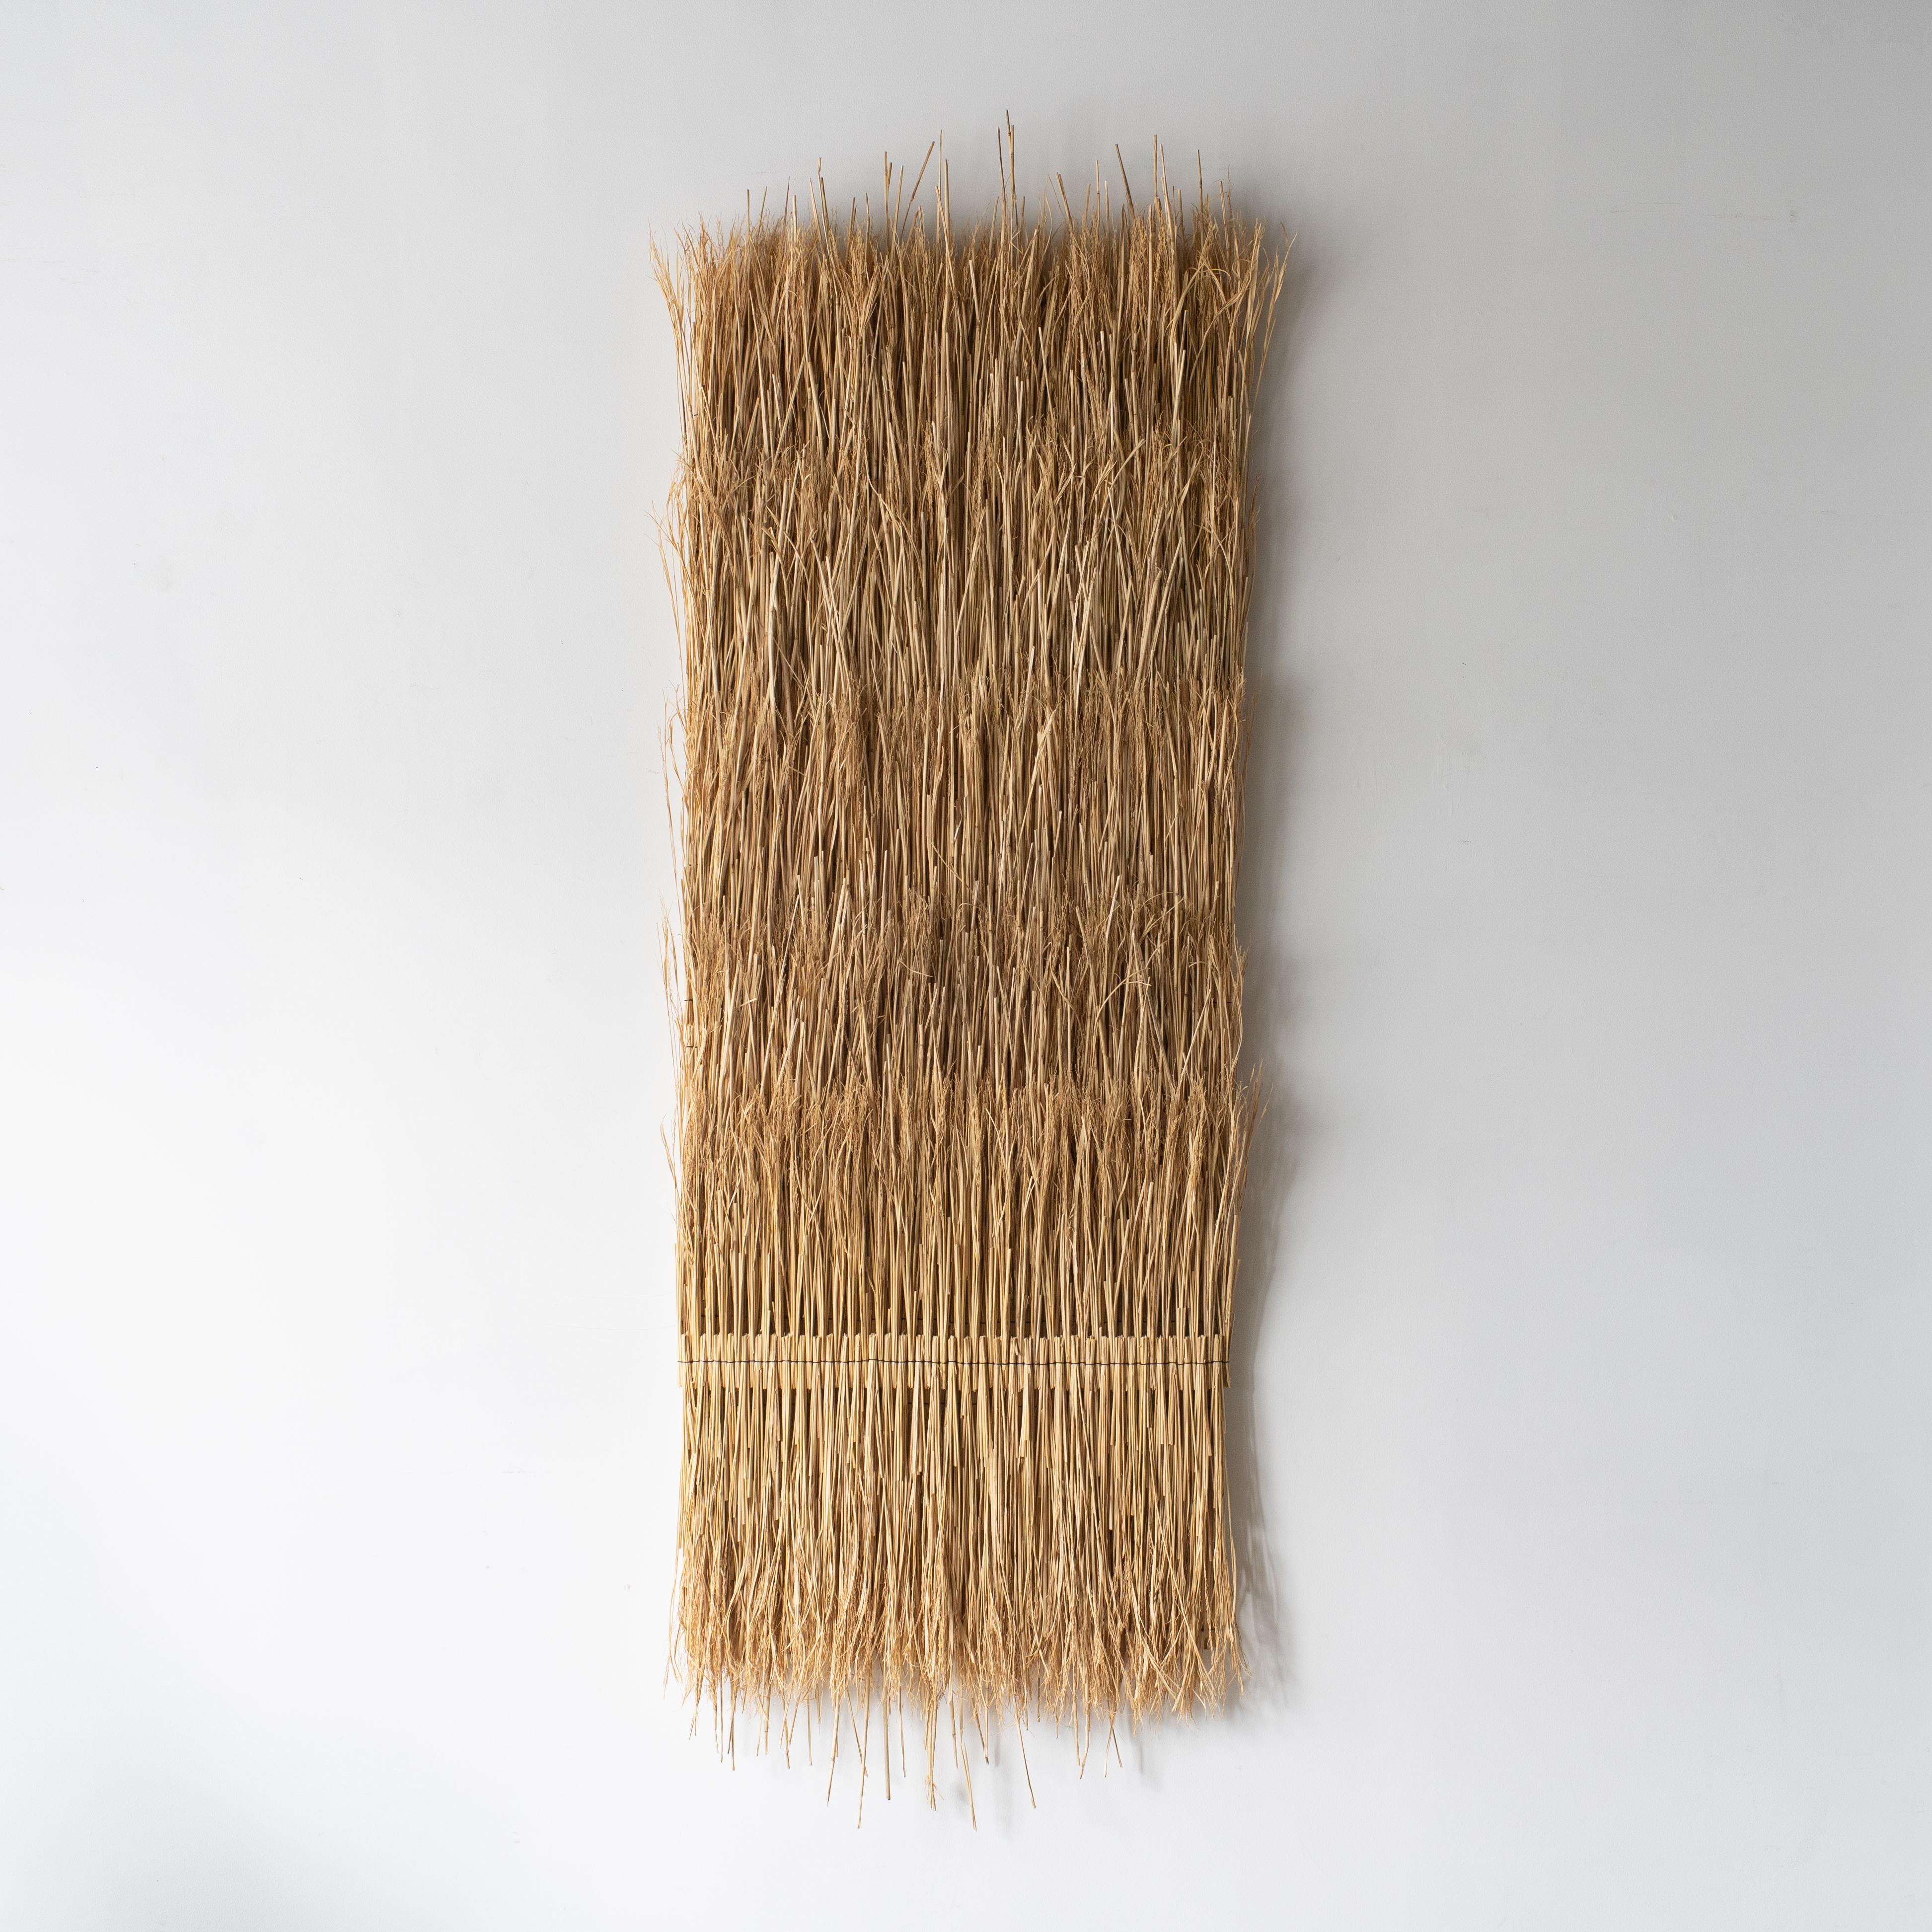 Hand-sewed rice straw art by Arko.
Title: Composition Accelerando #01
This work has the feelings of contemporary, tribal art, contemporary craft art, created with the respect for wild nature.
Arko is a finalist of the Loewe Craft prize 2018.